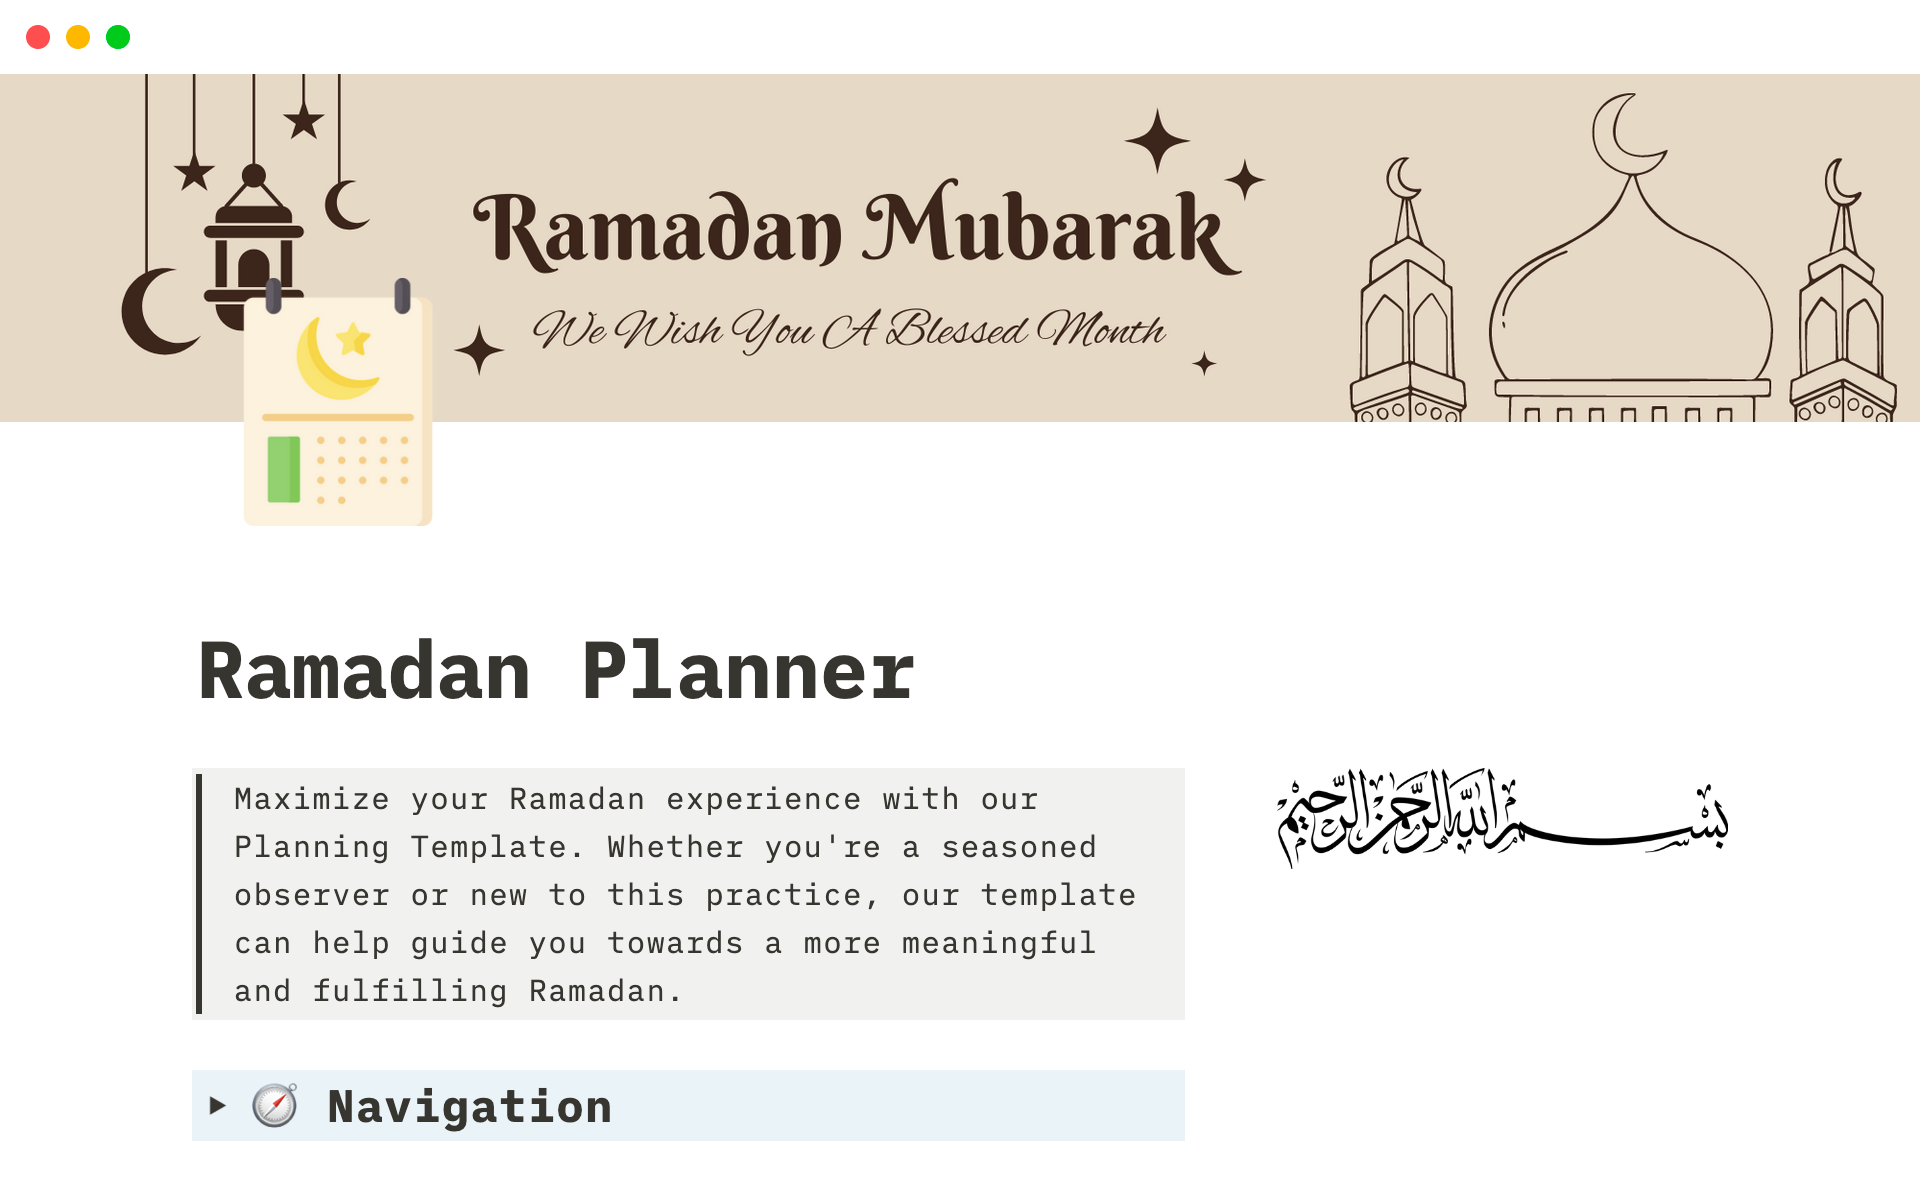 This Notion template provides a comprehensive guide for organizing and tracking your Ramadan goals, schedule, meals, prayers, and reflections.